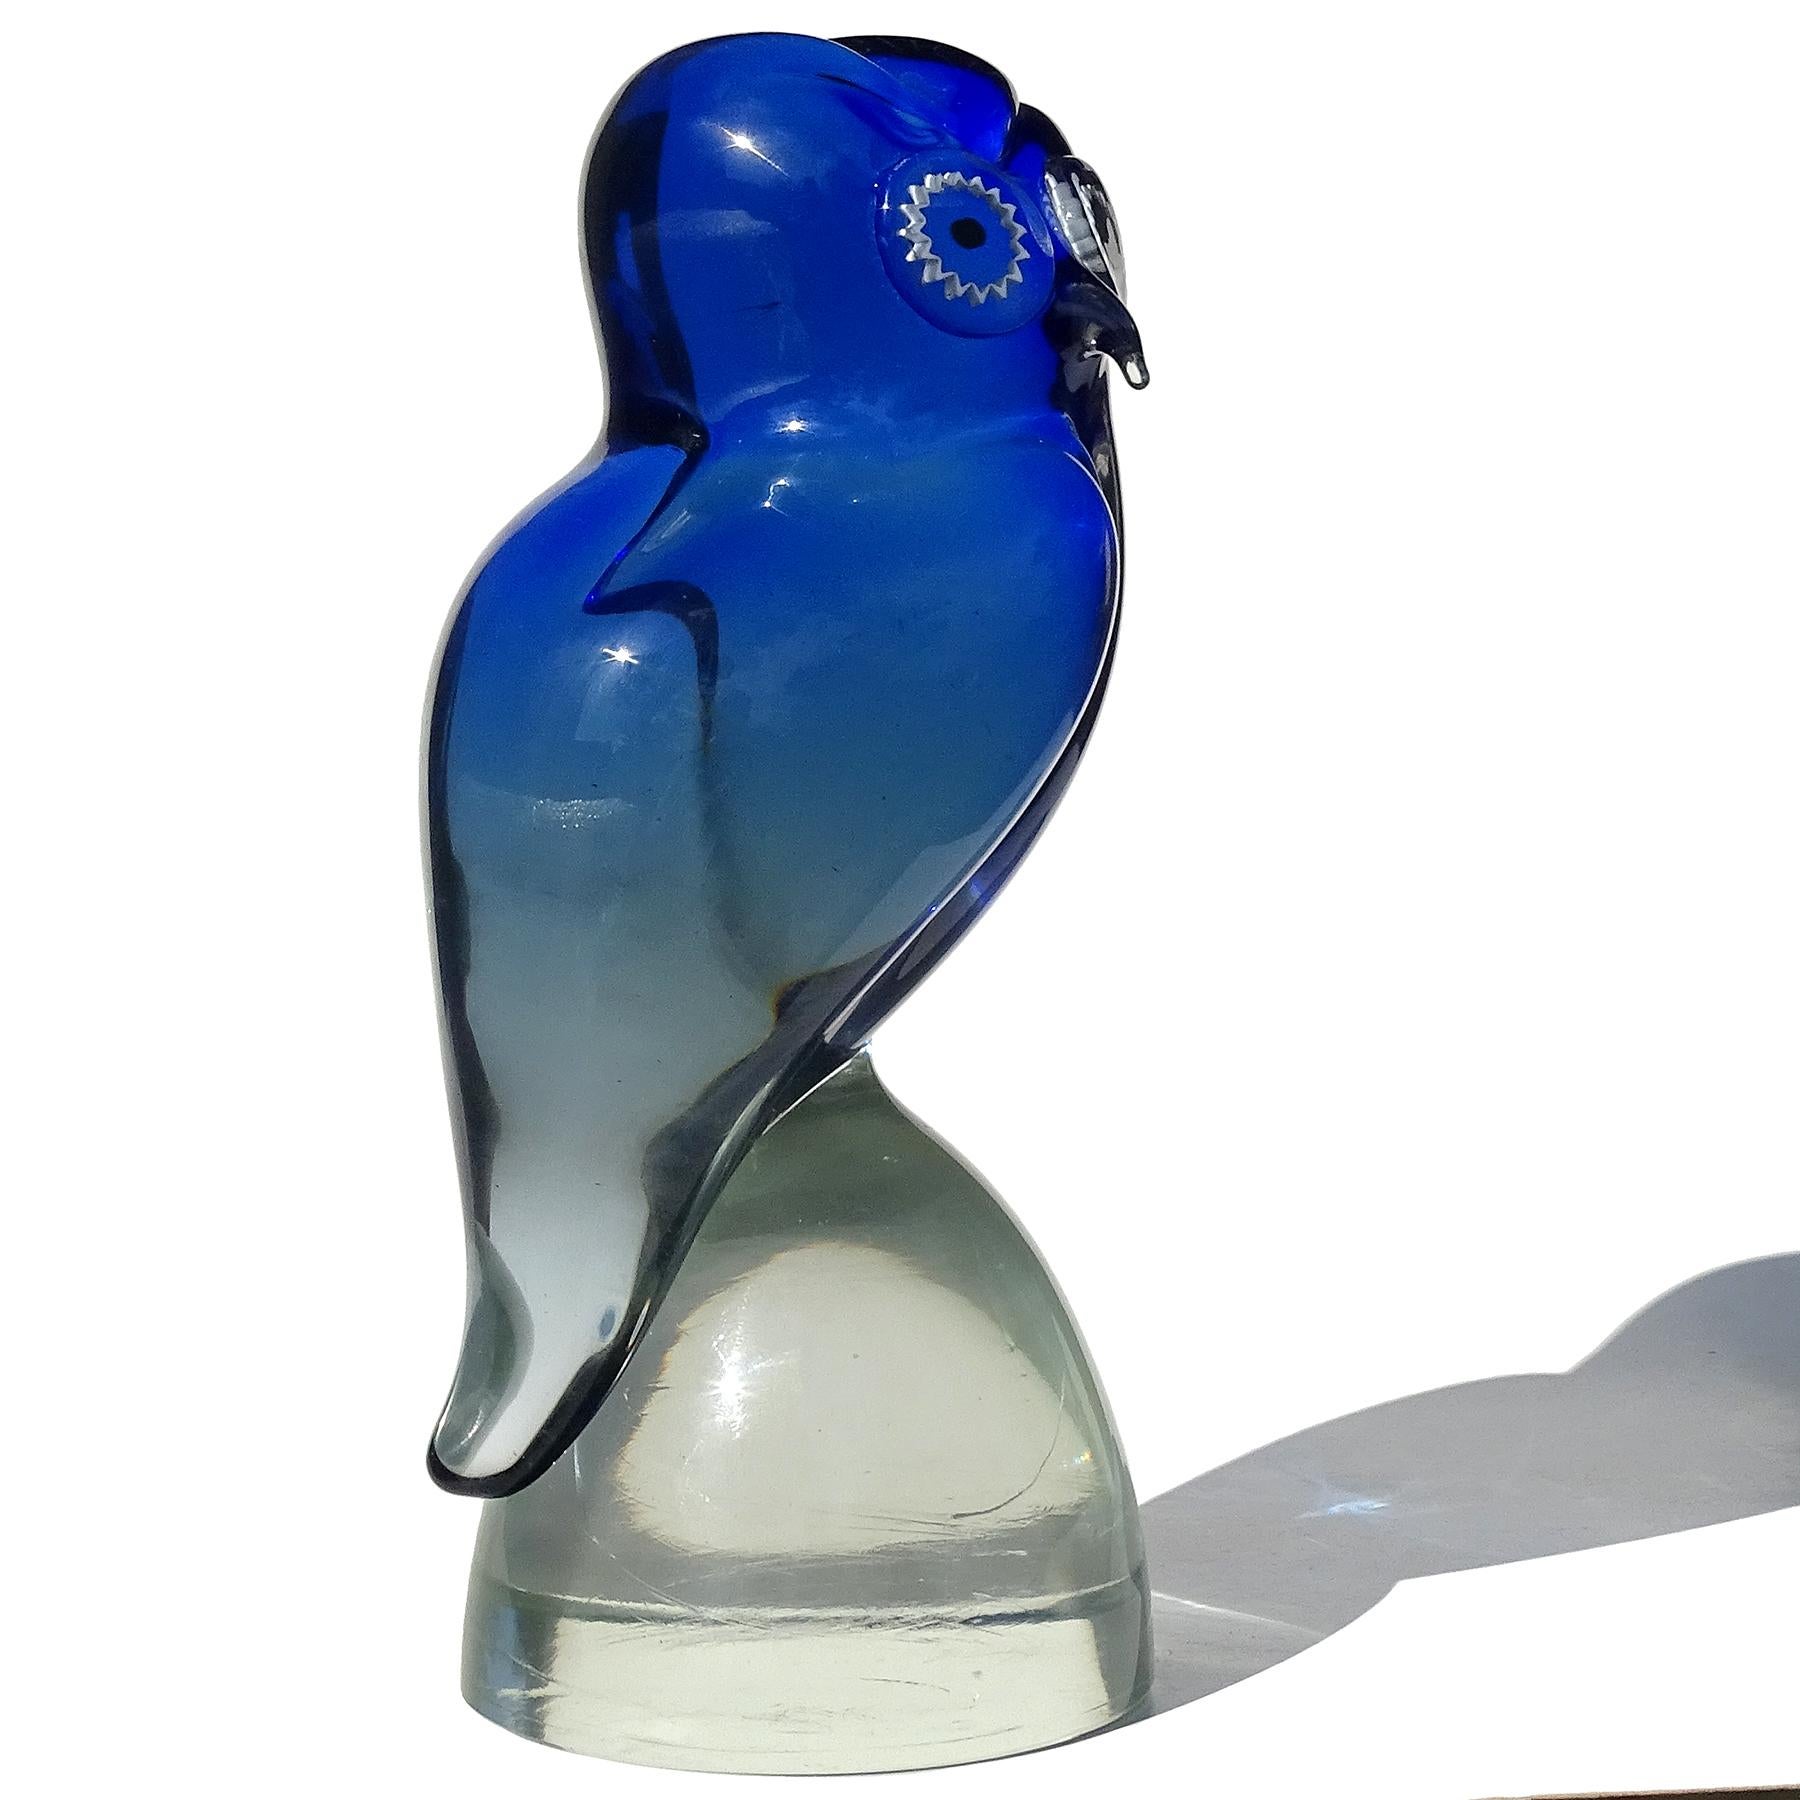 Beautiful vintage Murano hand blown Sommerso cobalt blue to clear Italian art glass owl bird figure, sculpture. Documented to the Salviati Company. Have owned several with labels and signatures before. The owl has white on clear murrines for the